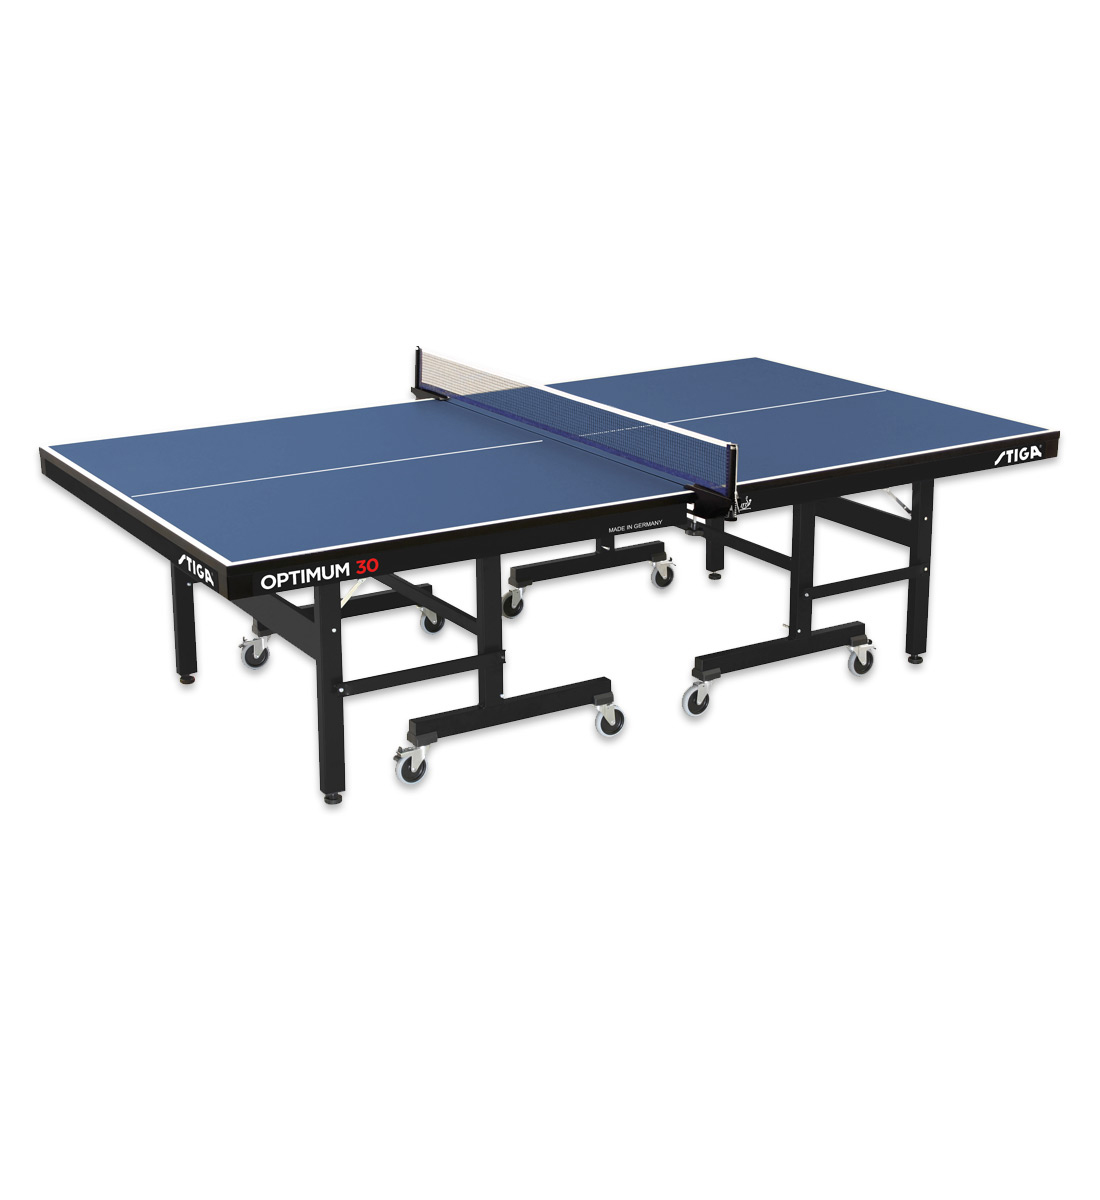 What is the best  STIGA table tennis table?